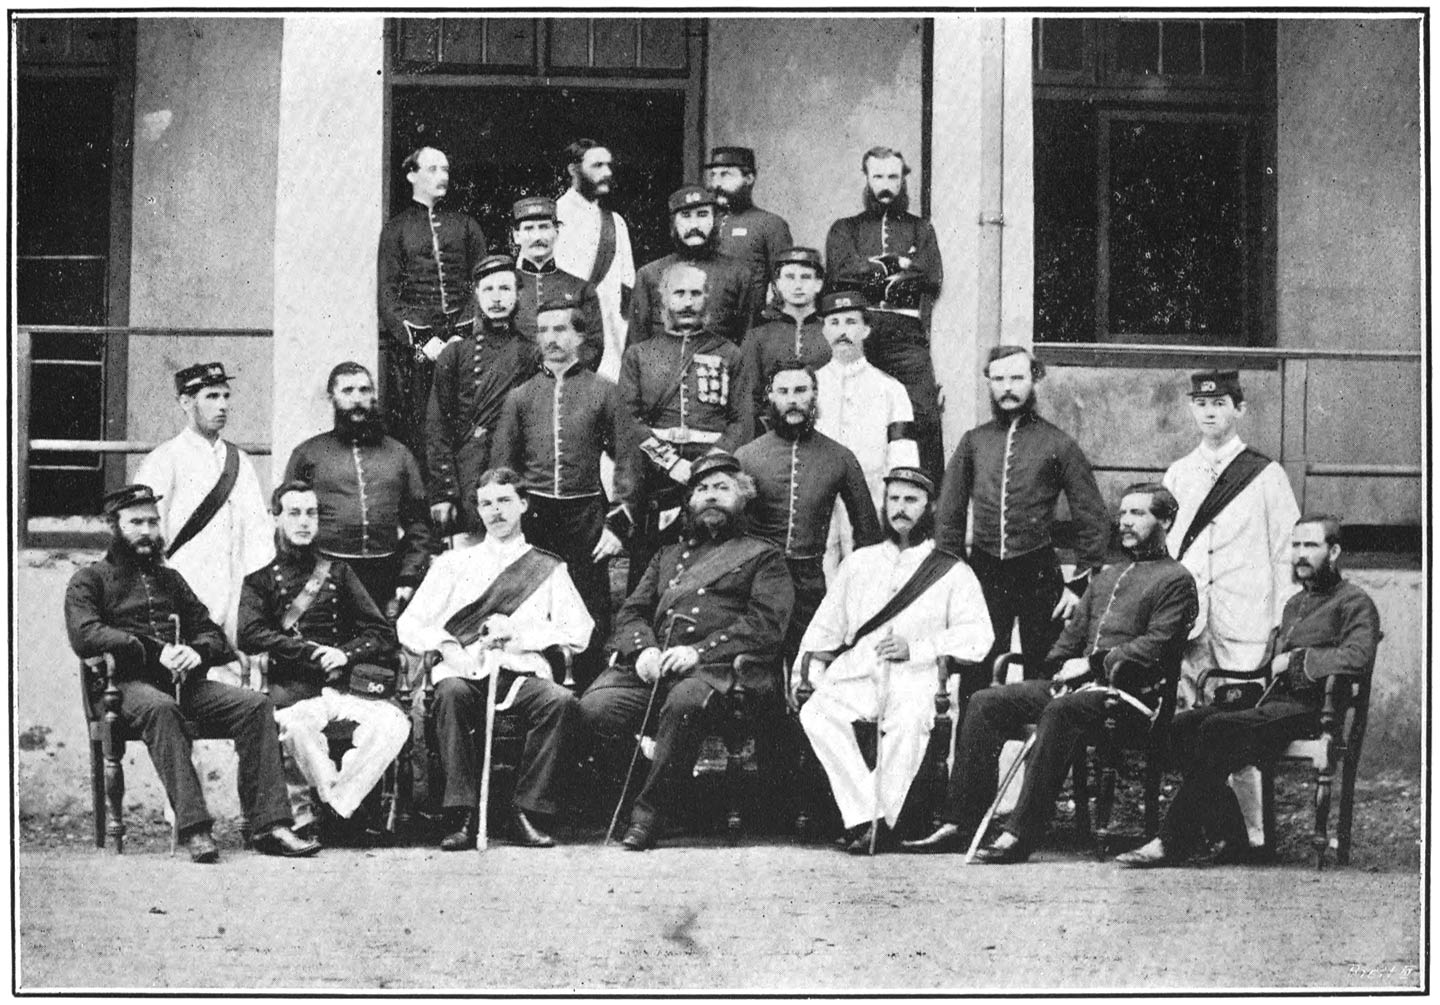 OFFICERS OF THE 50th REGIMENT